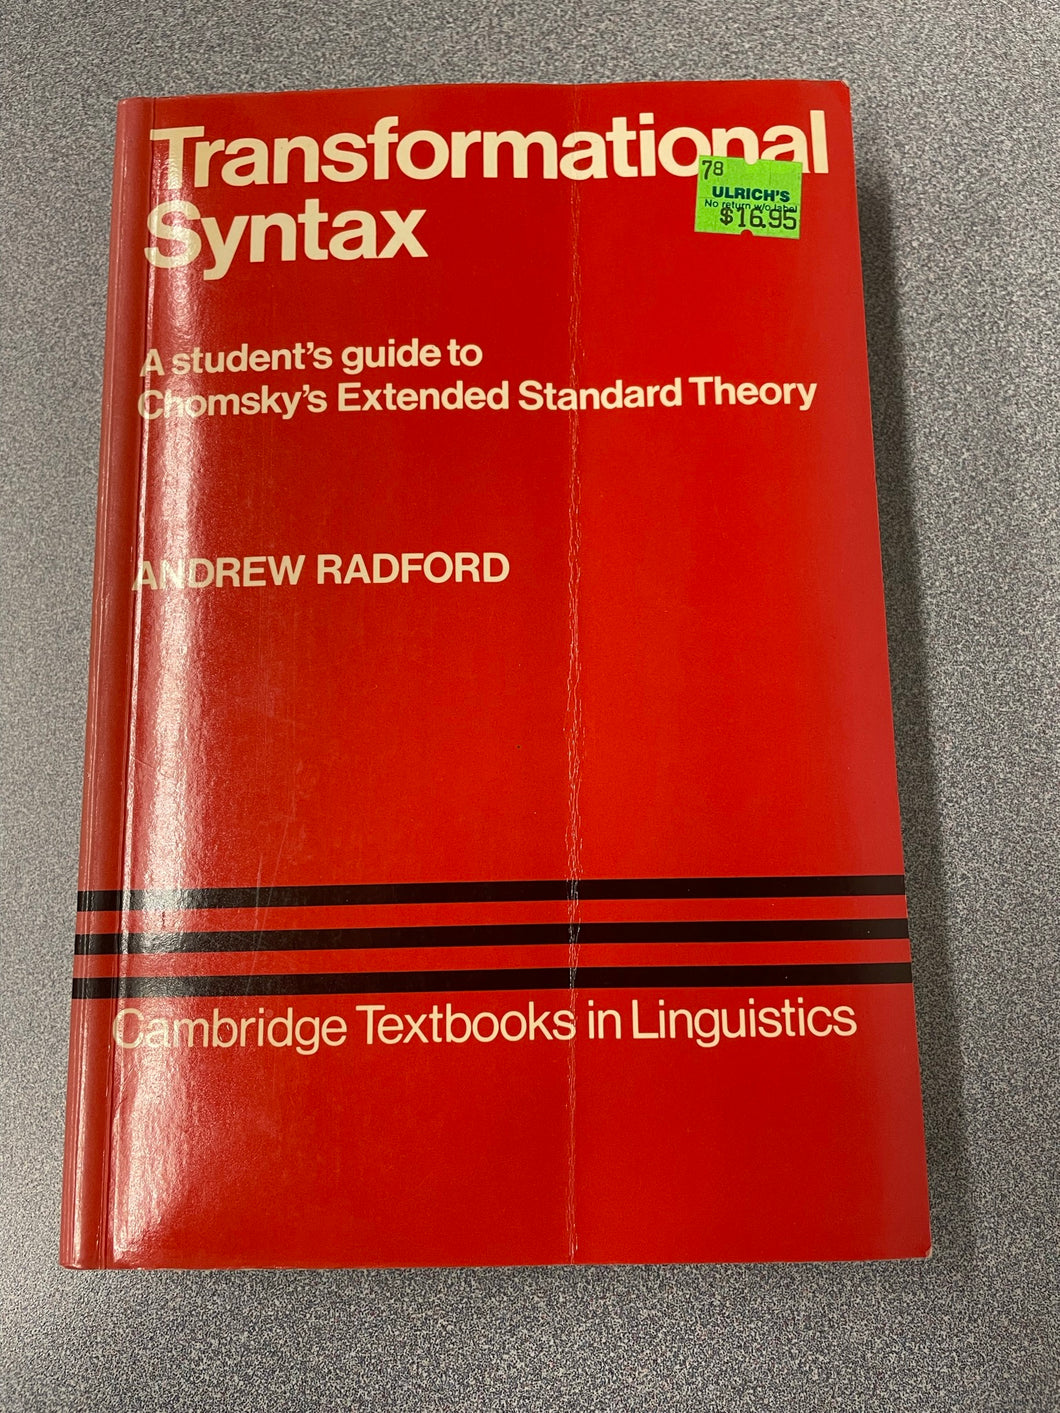 Transformational Syntax: A Student's Guide to Chomsky's Extended Standard Theory, Radford, Andrew [1988] AN 12/22